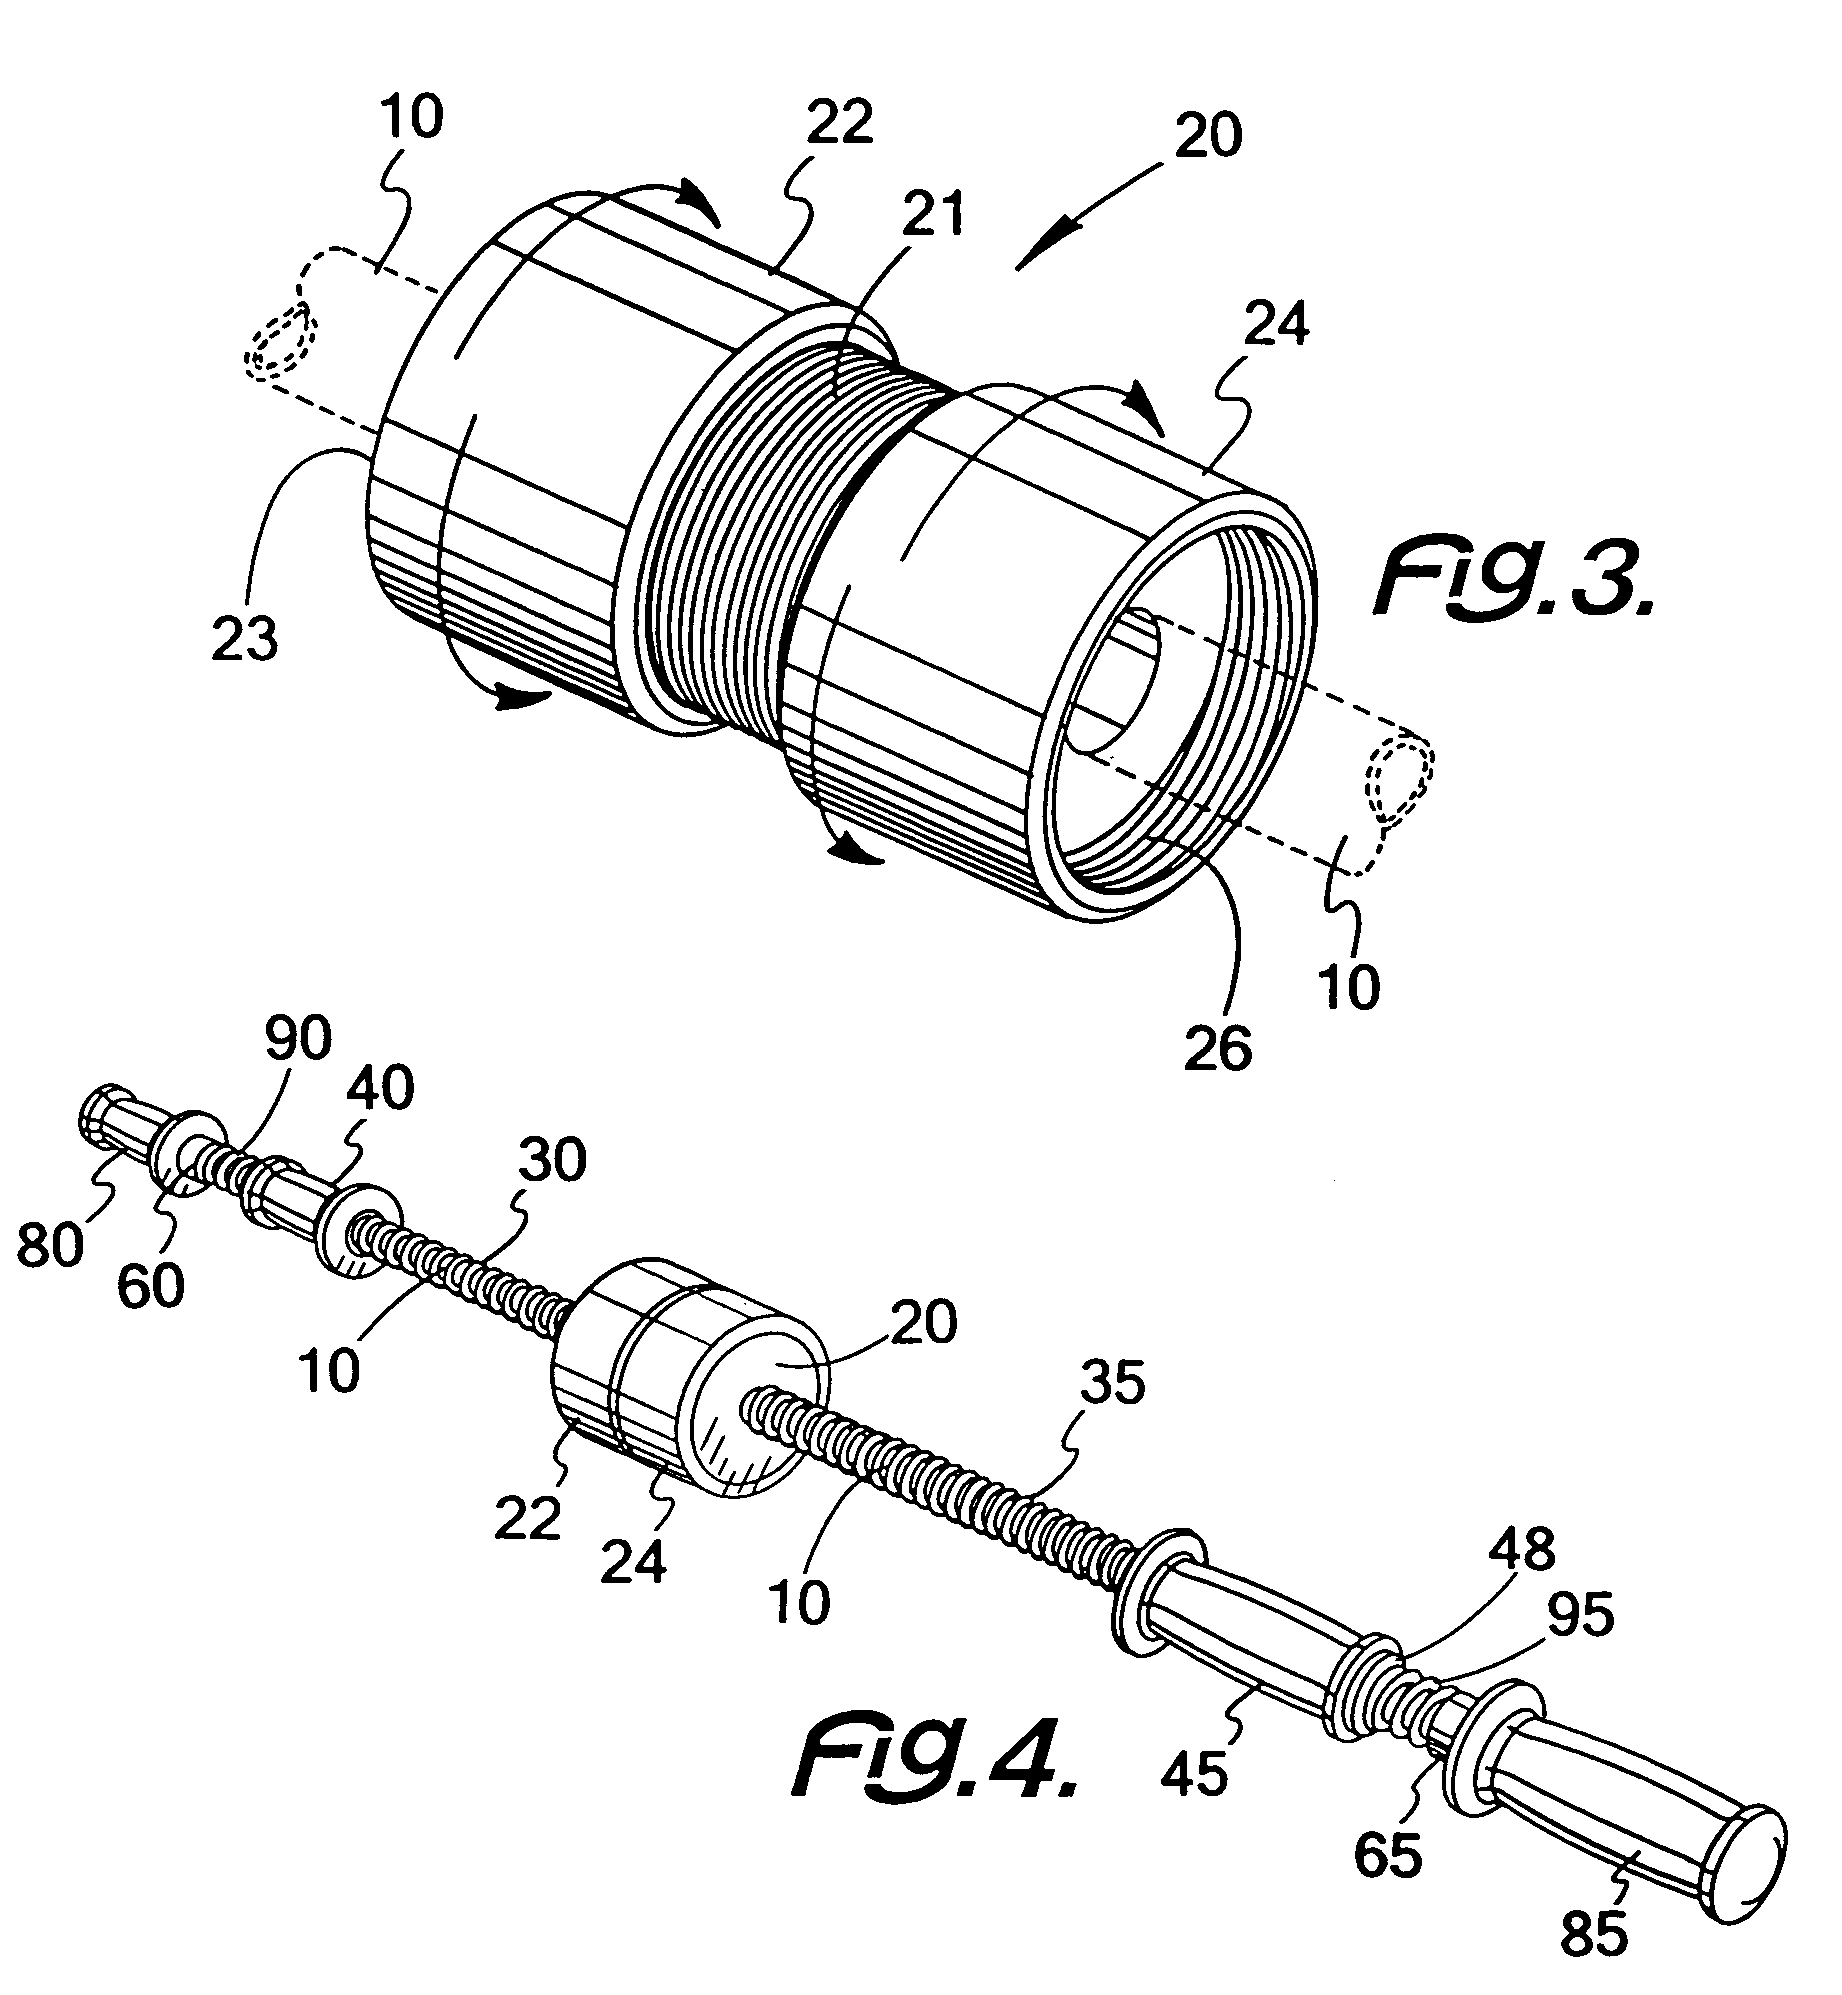 Reciprocating weight exercise apparatus